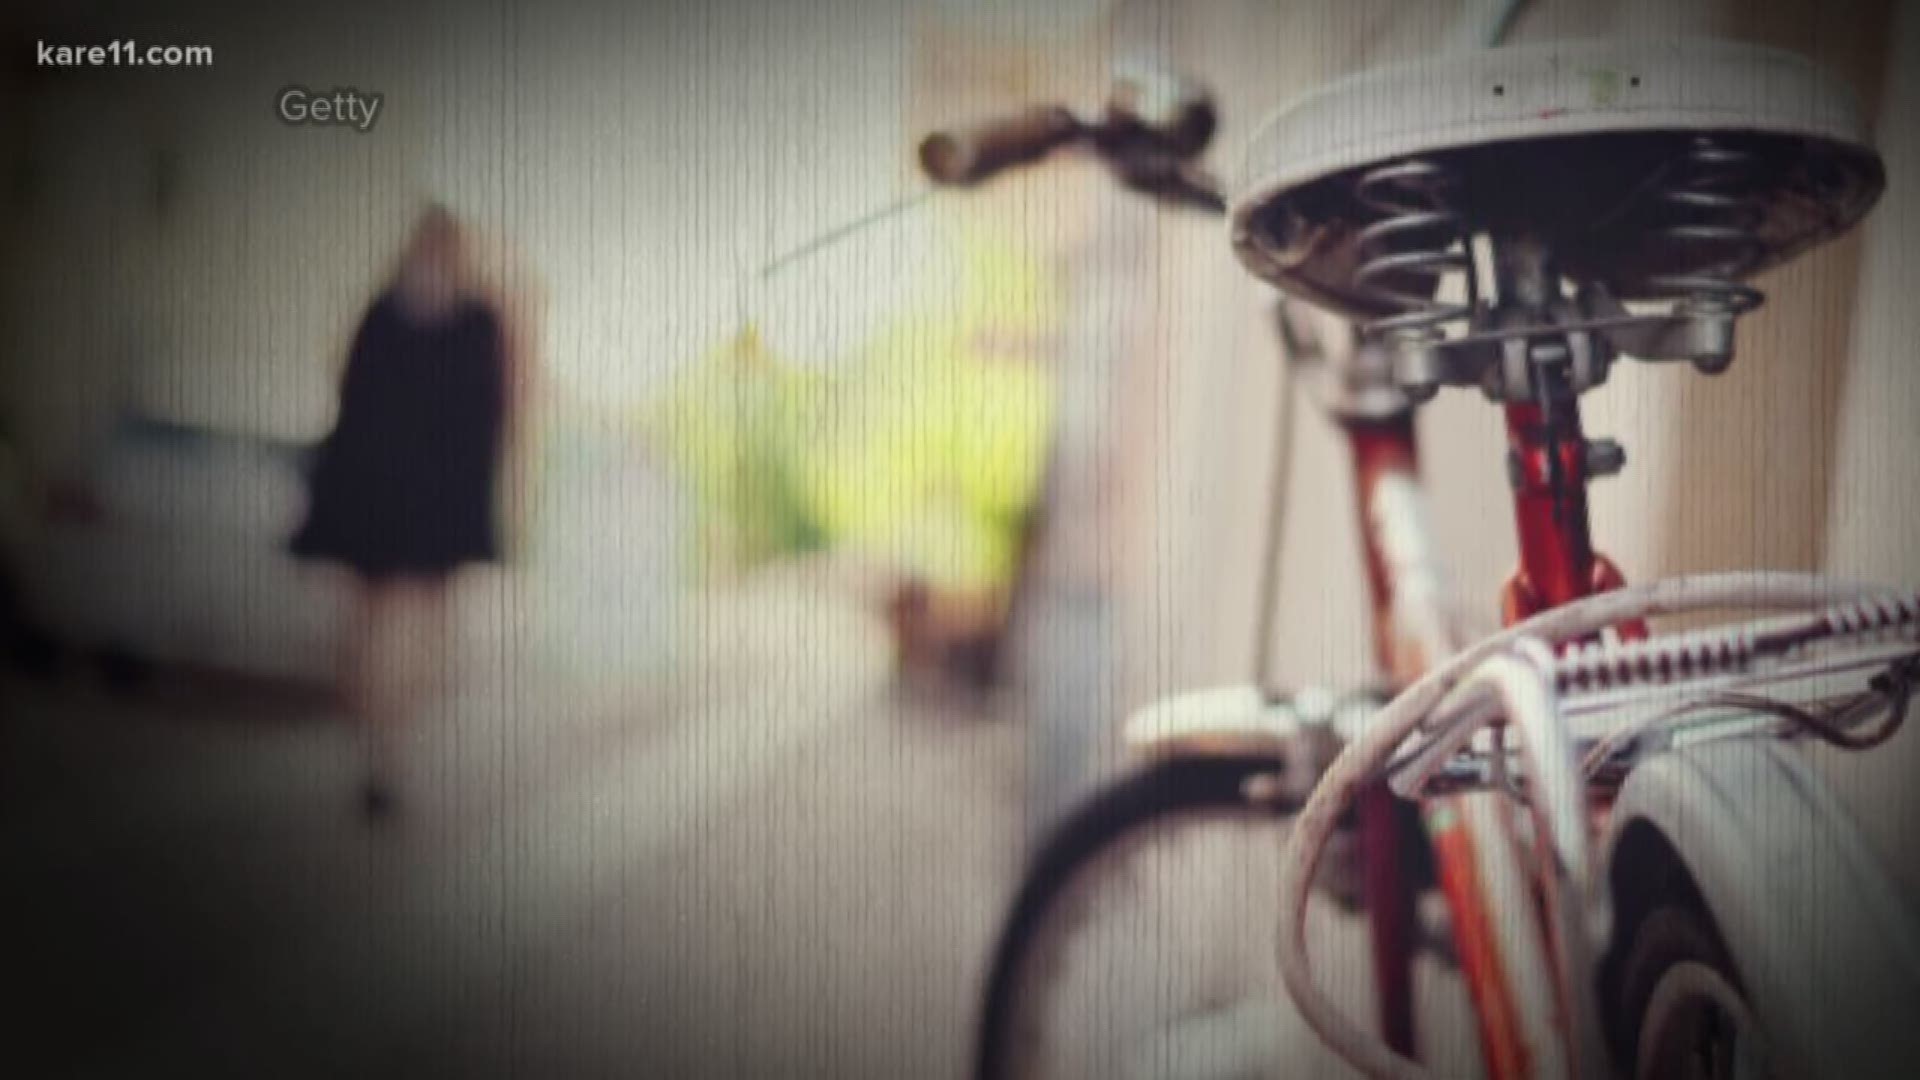 If you take a scroll through Facebook, chances are you'll see a post about a missing bike or two or three. Minneapolis police say bike thefts have jumped this summer to the highest levels they've seen in the past five years.